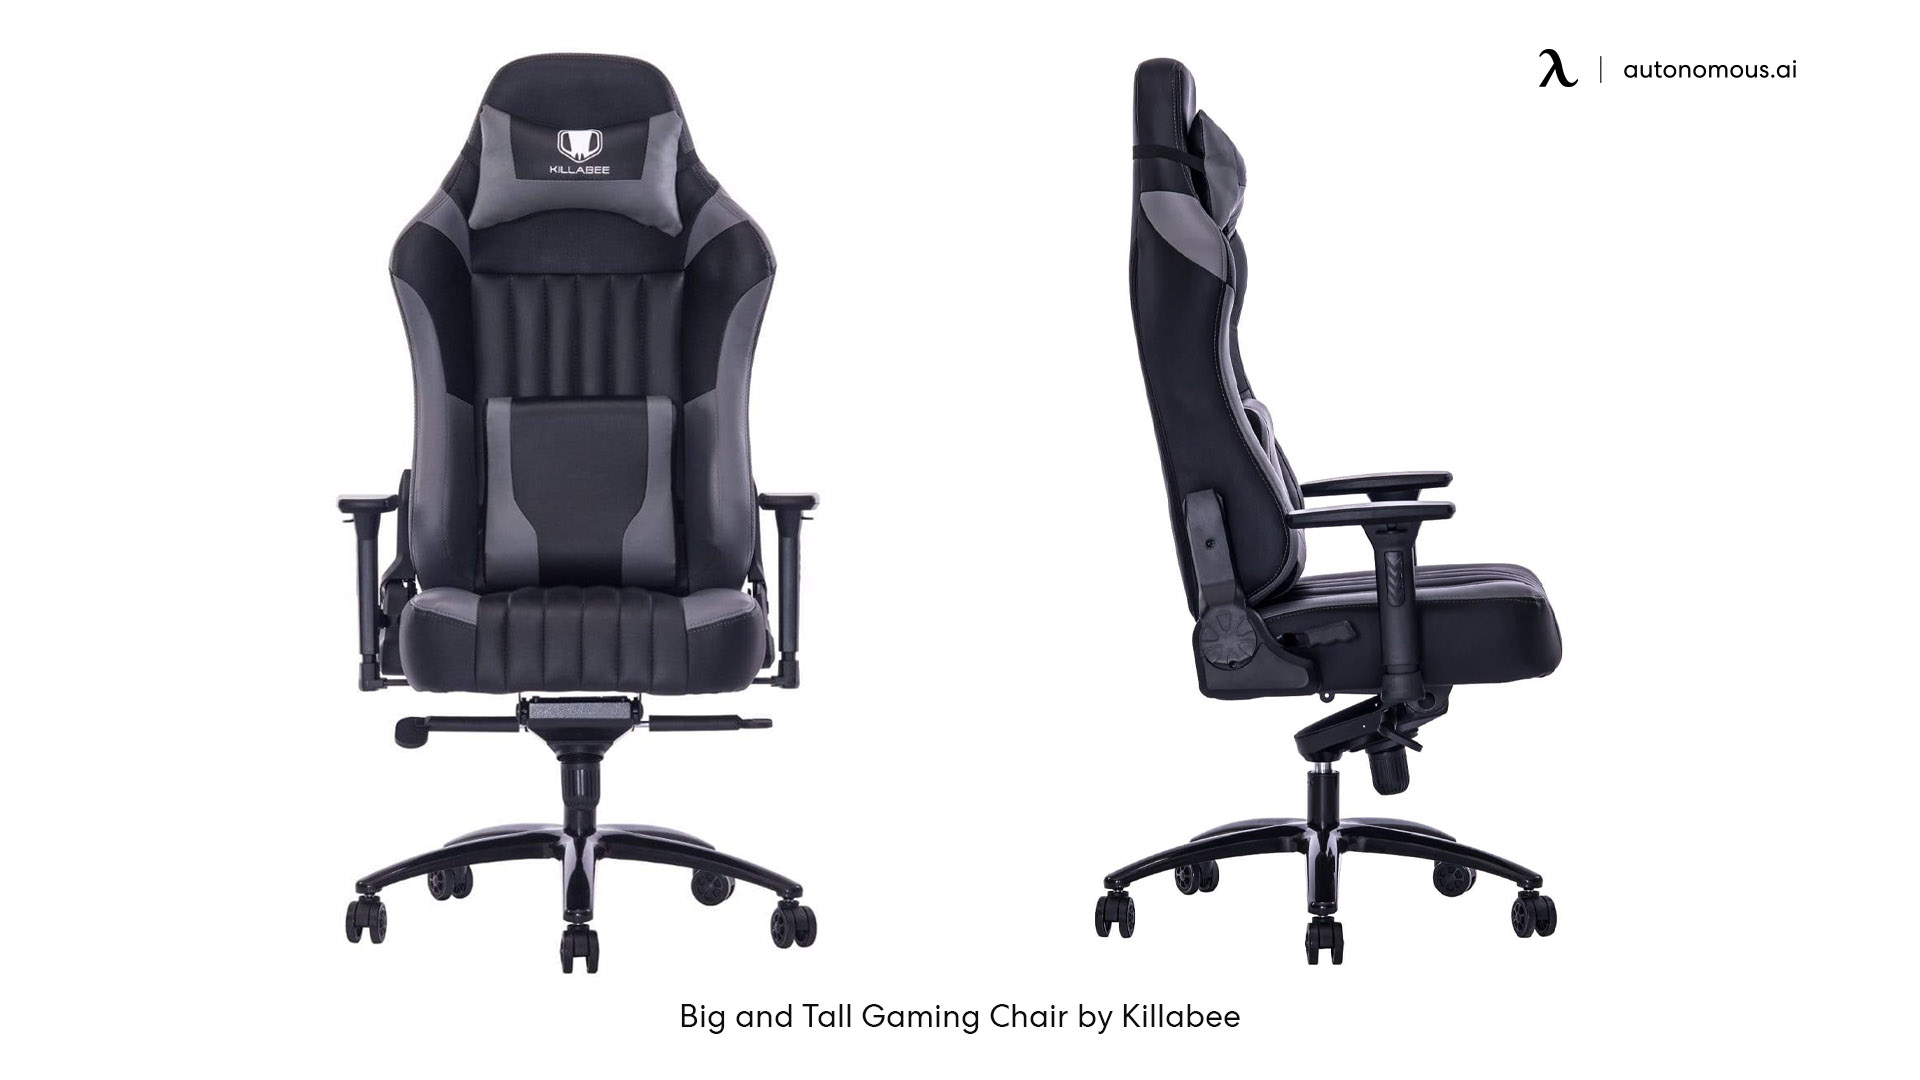 Big and Tall Gaming Chair by Killabee